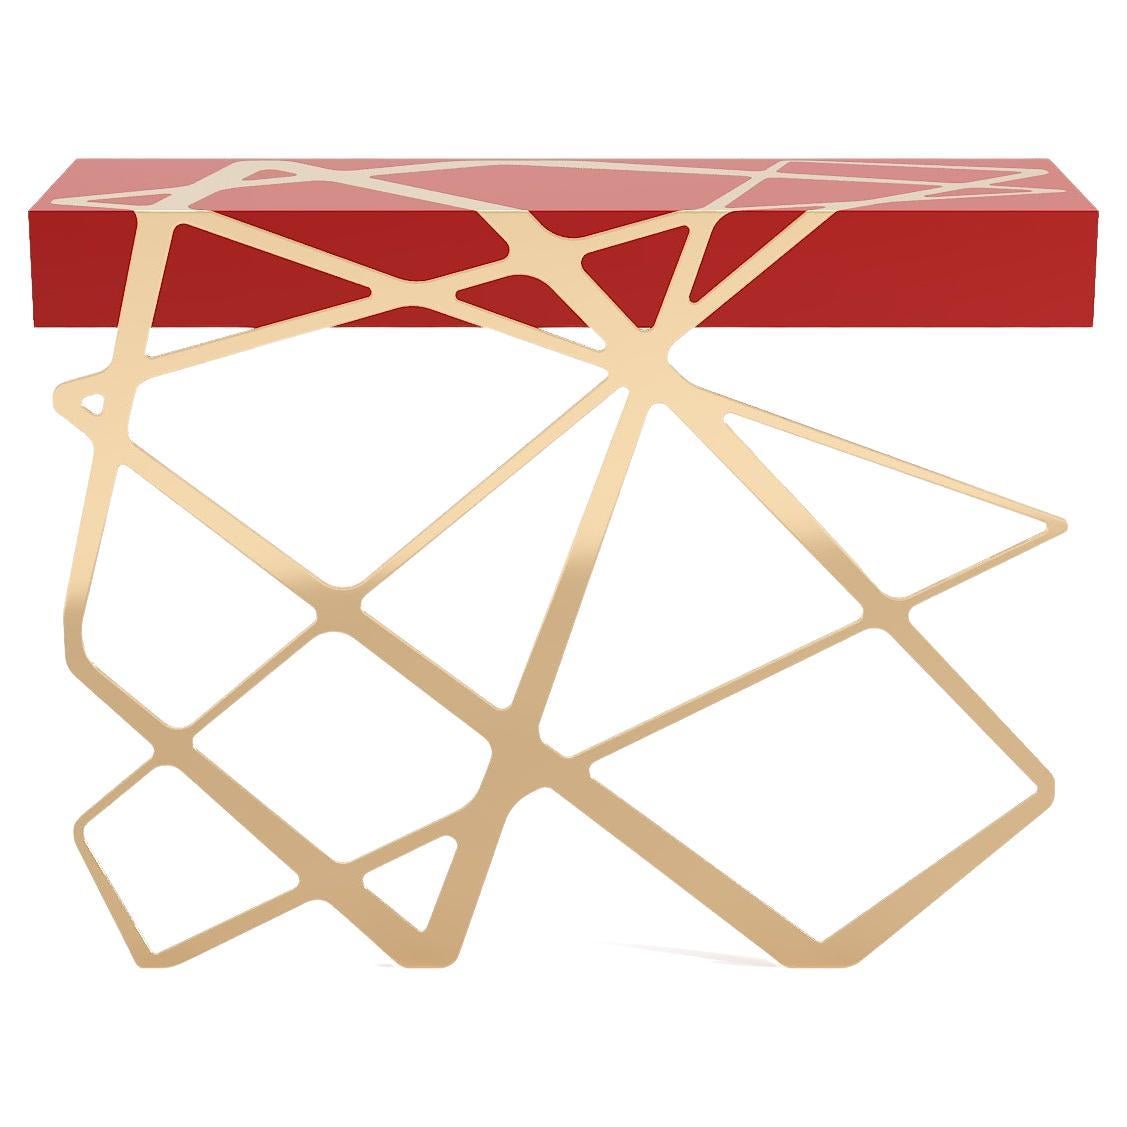 21st Century Modern Console Table in Red Lacquer and Brass